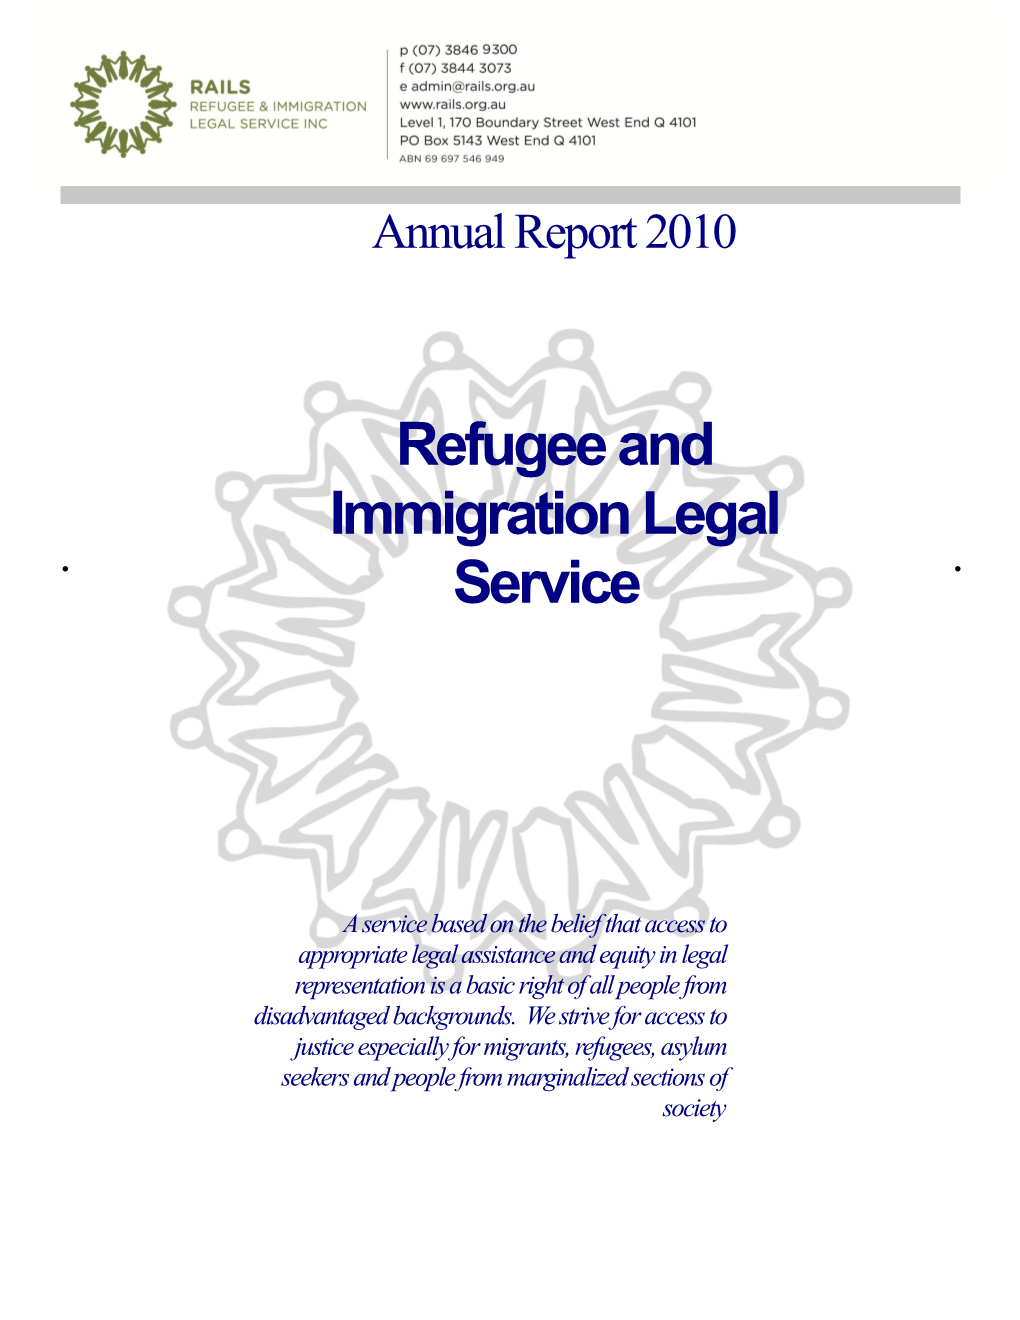 Refugee and Immigration Legal Service